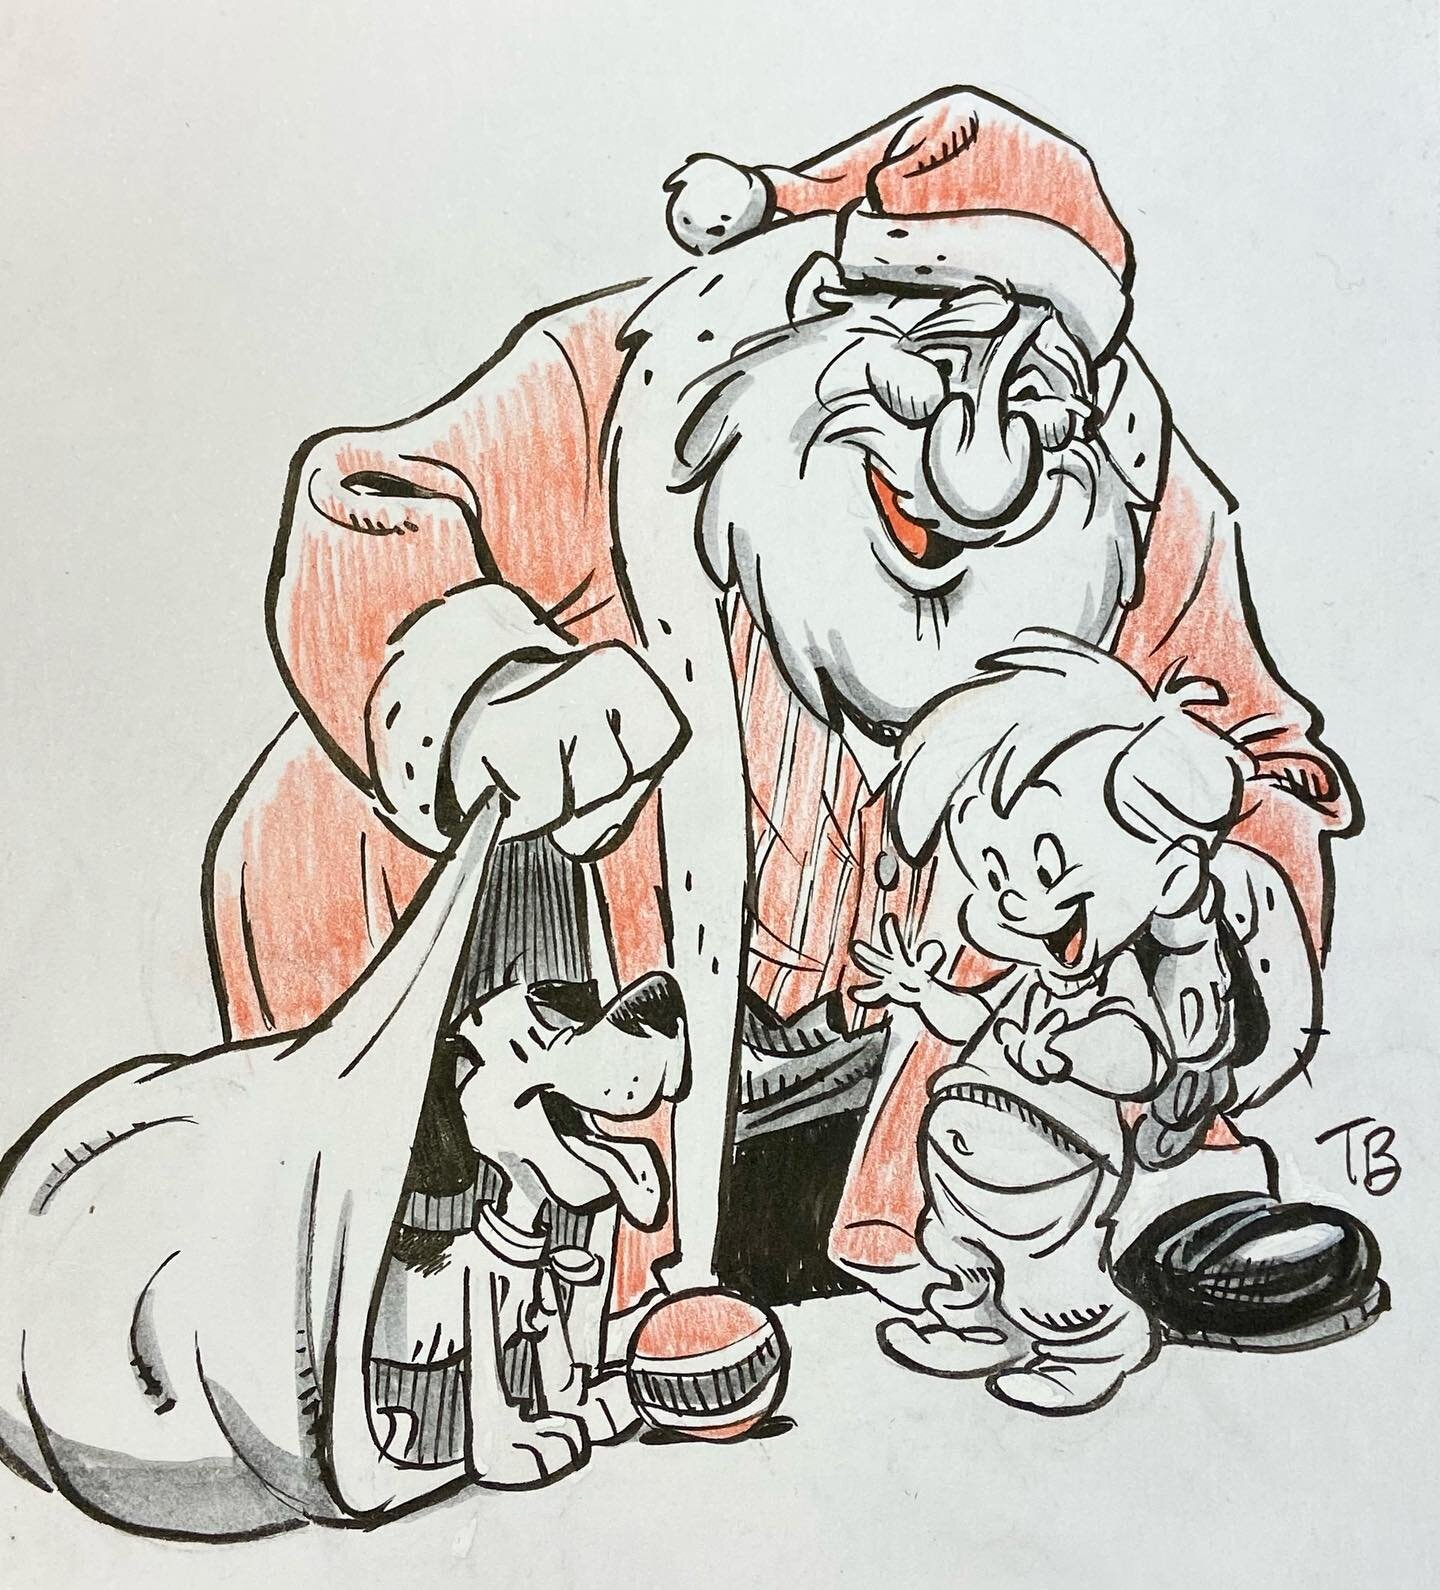 Have you been naughty or nice? #hescoming #santaclaus #christmas #ink #drawing #forfun